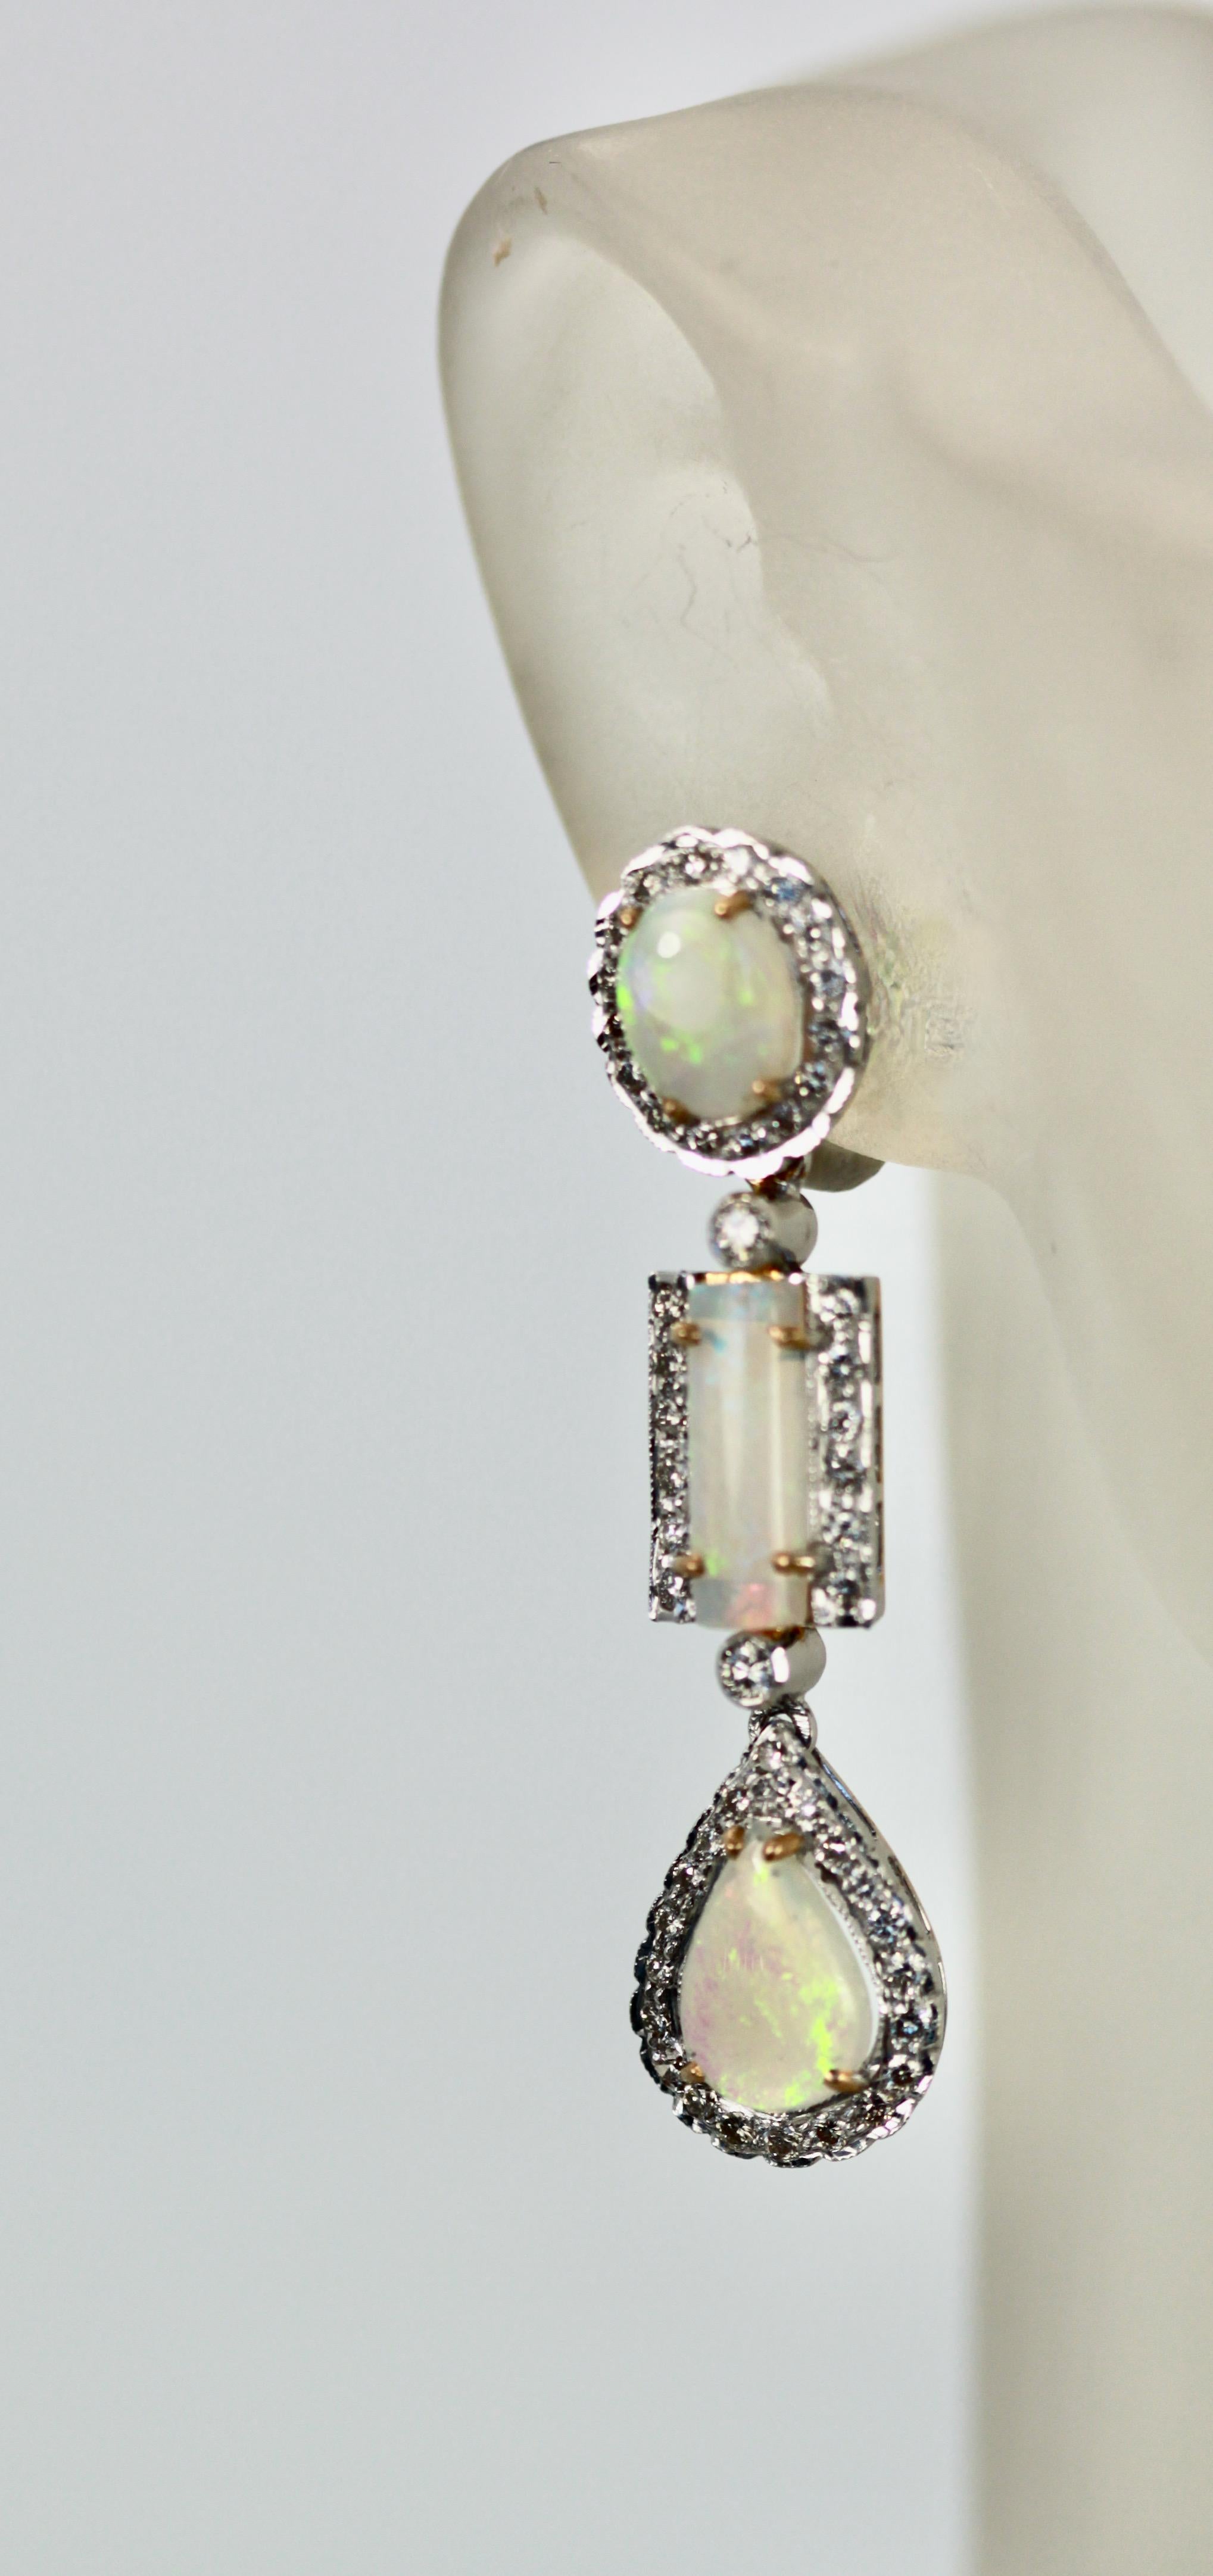 These beautiful Opal Diamond drop earrings are made in 18K Yellow Gold.  There are 3 Opals per earring each Opal with a Diamond surround.  One oval Opal of 1 carat, one rectangle Opal .75 carats, One teardrop Opal at 1.50 carats, to total 3.15